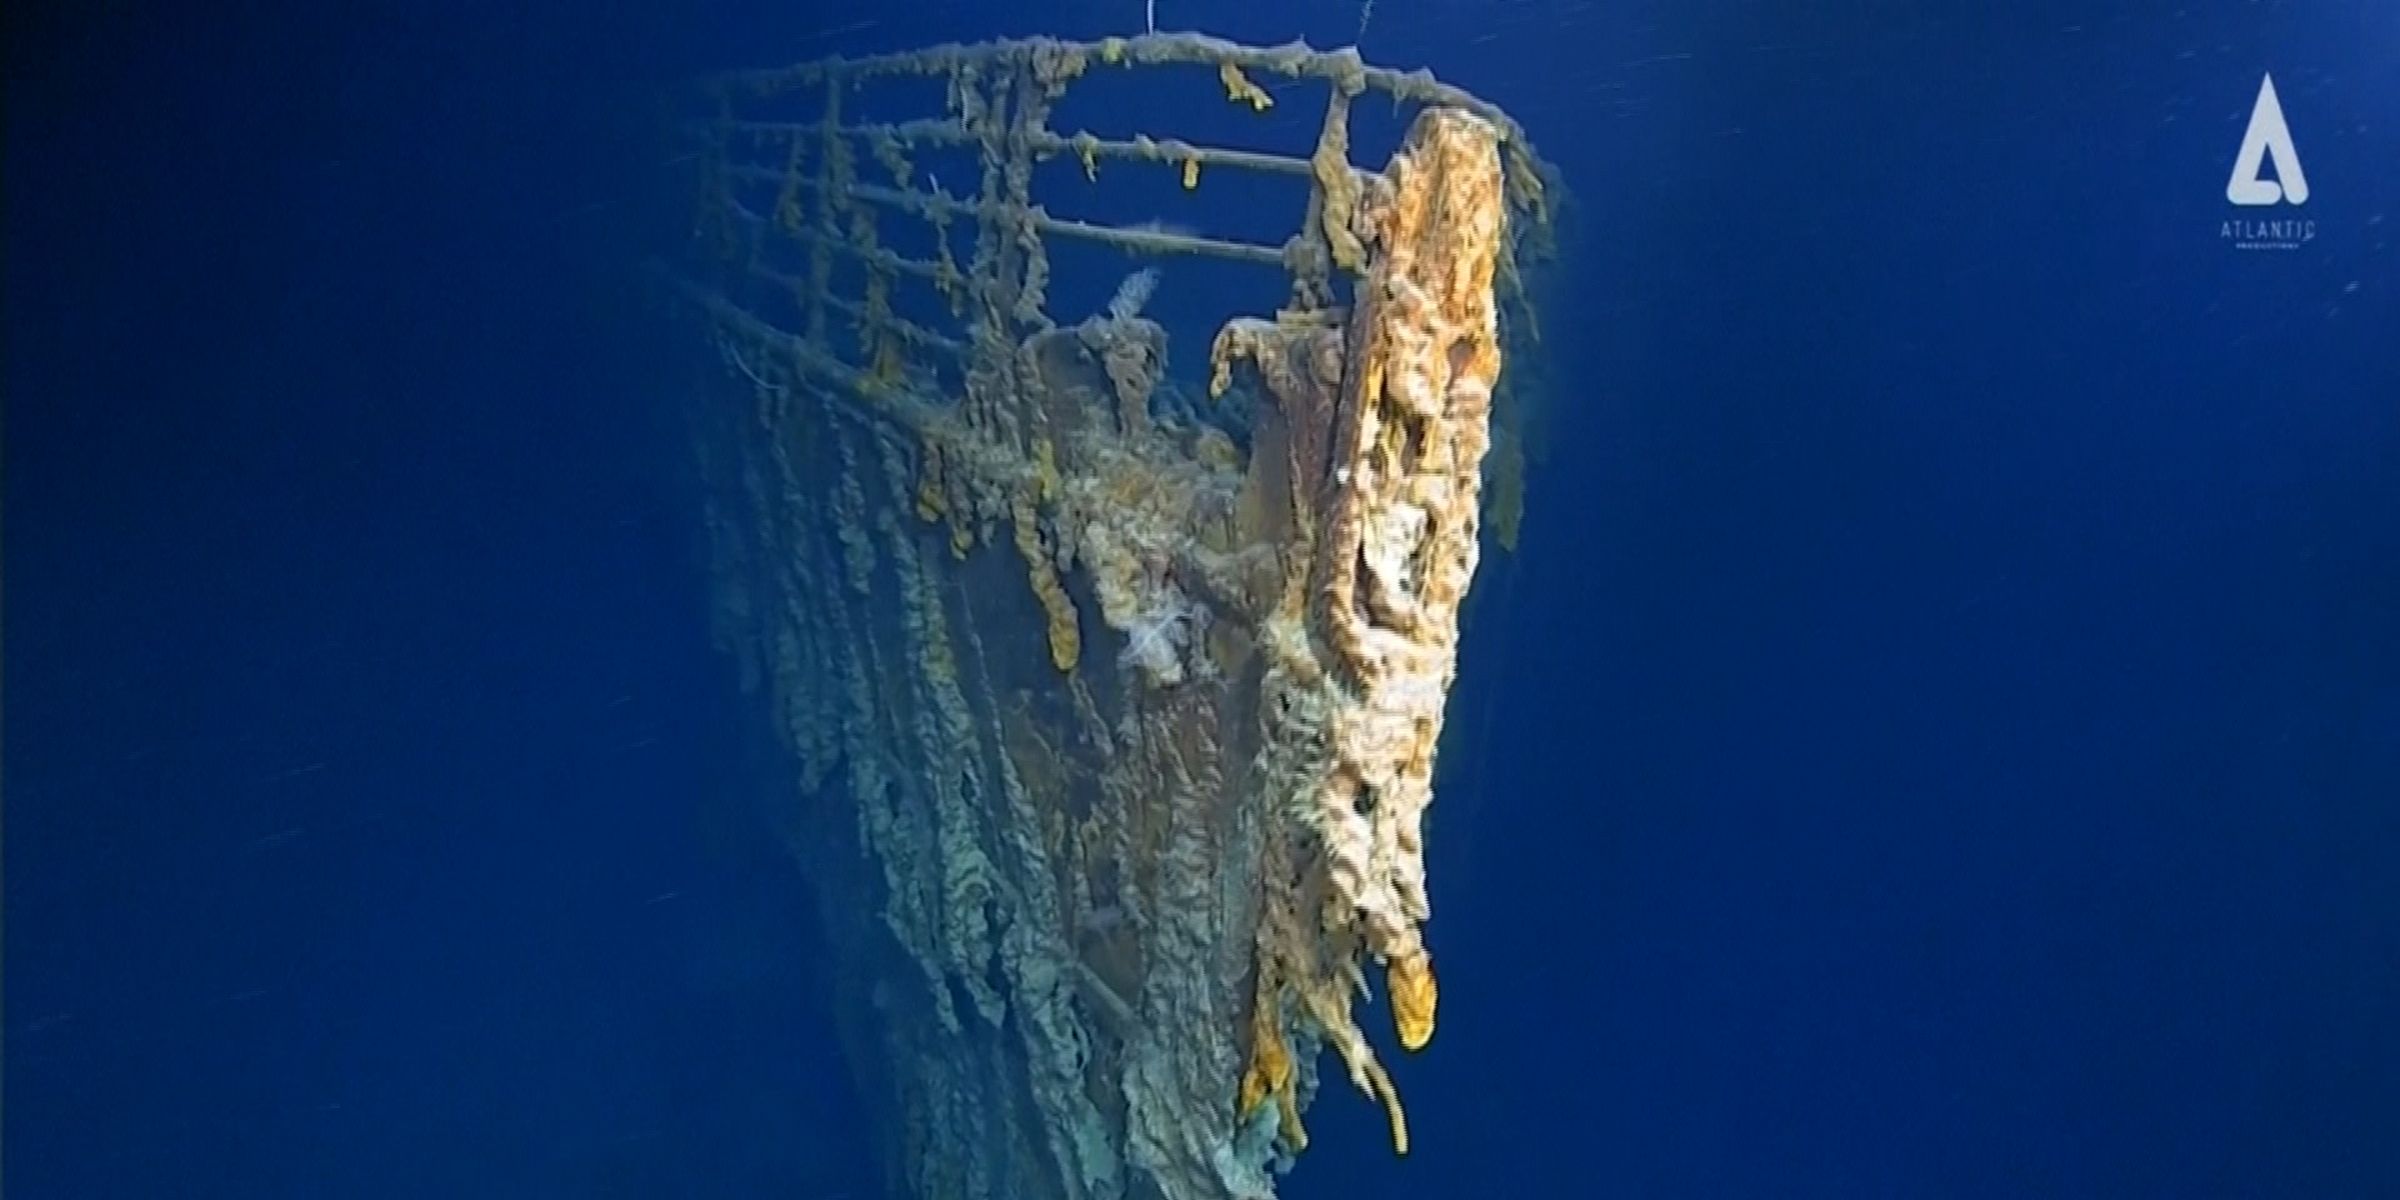 First image of the Titanic in 14 years show 'shocking' deterioration